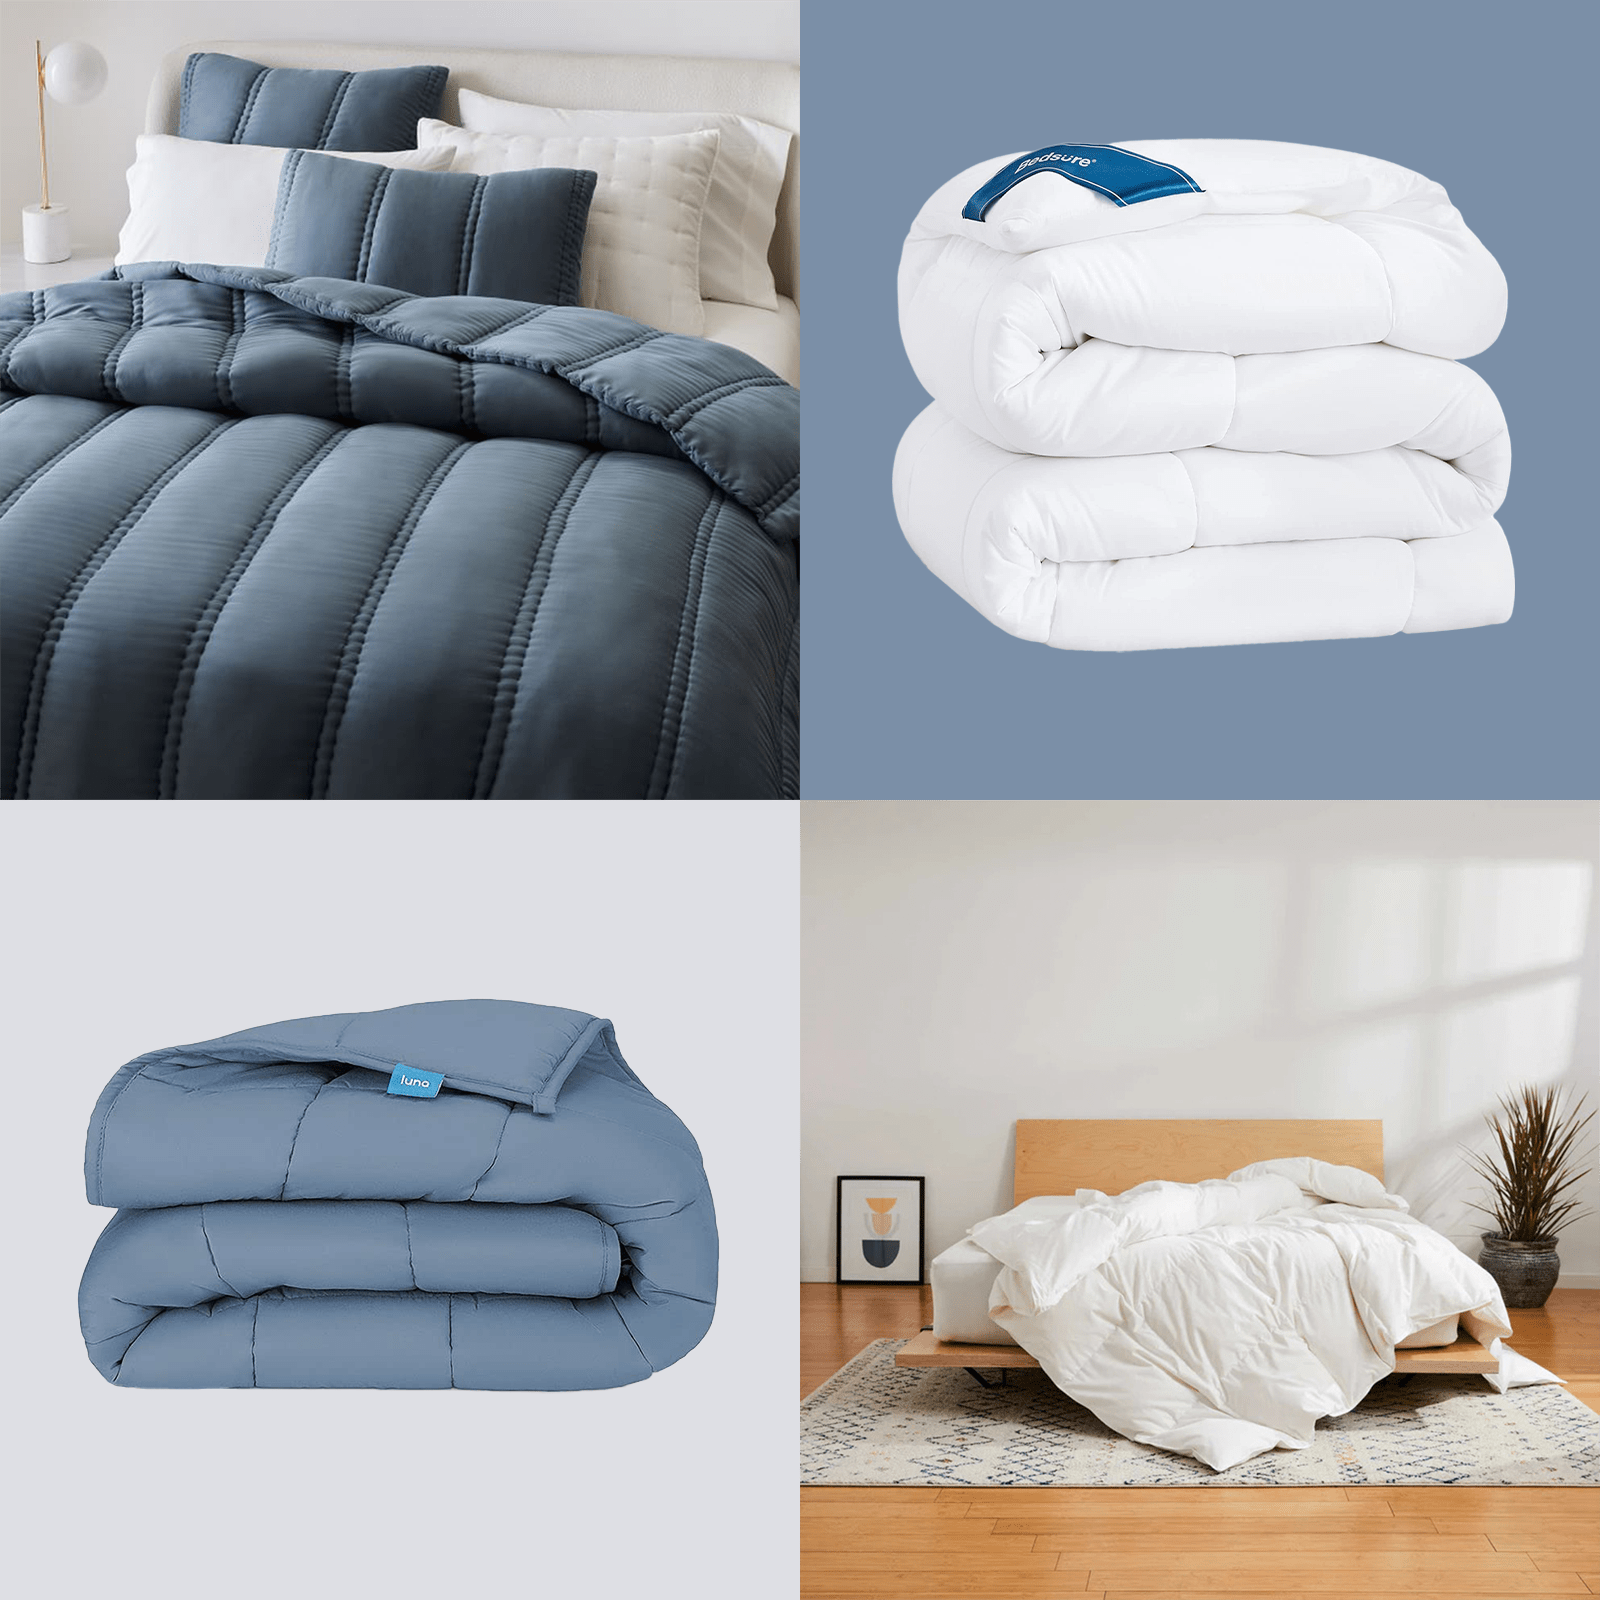 Top Blanket Materials to Keep You Comfortable This Winter